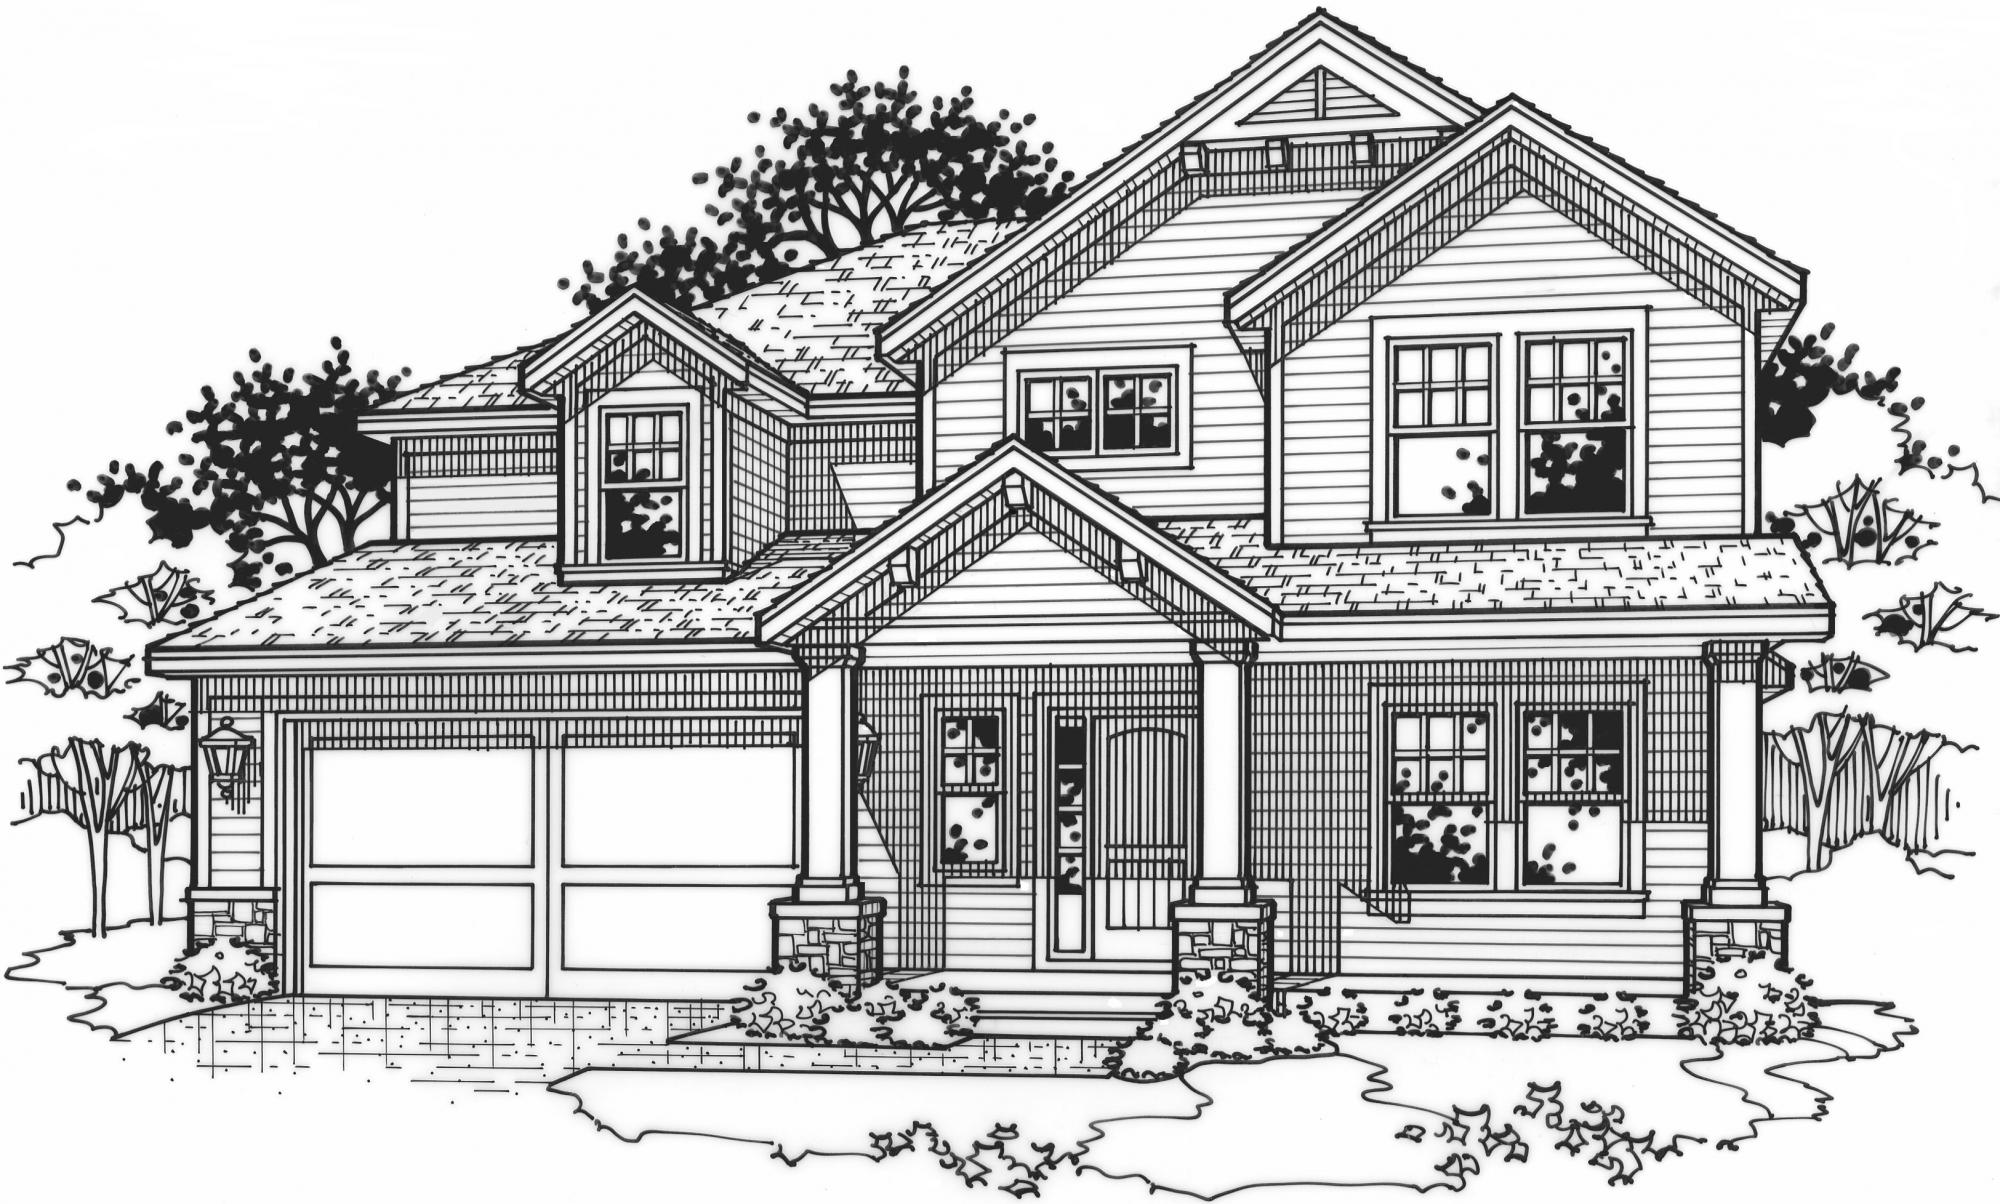 black and white rendering of a clover model from Lambie custom homes